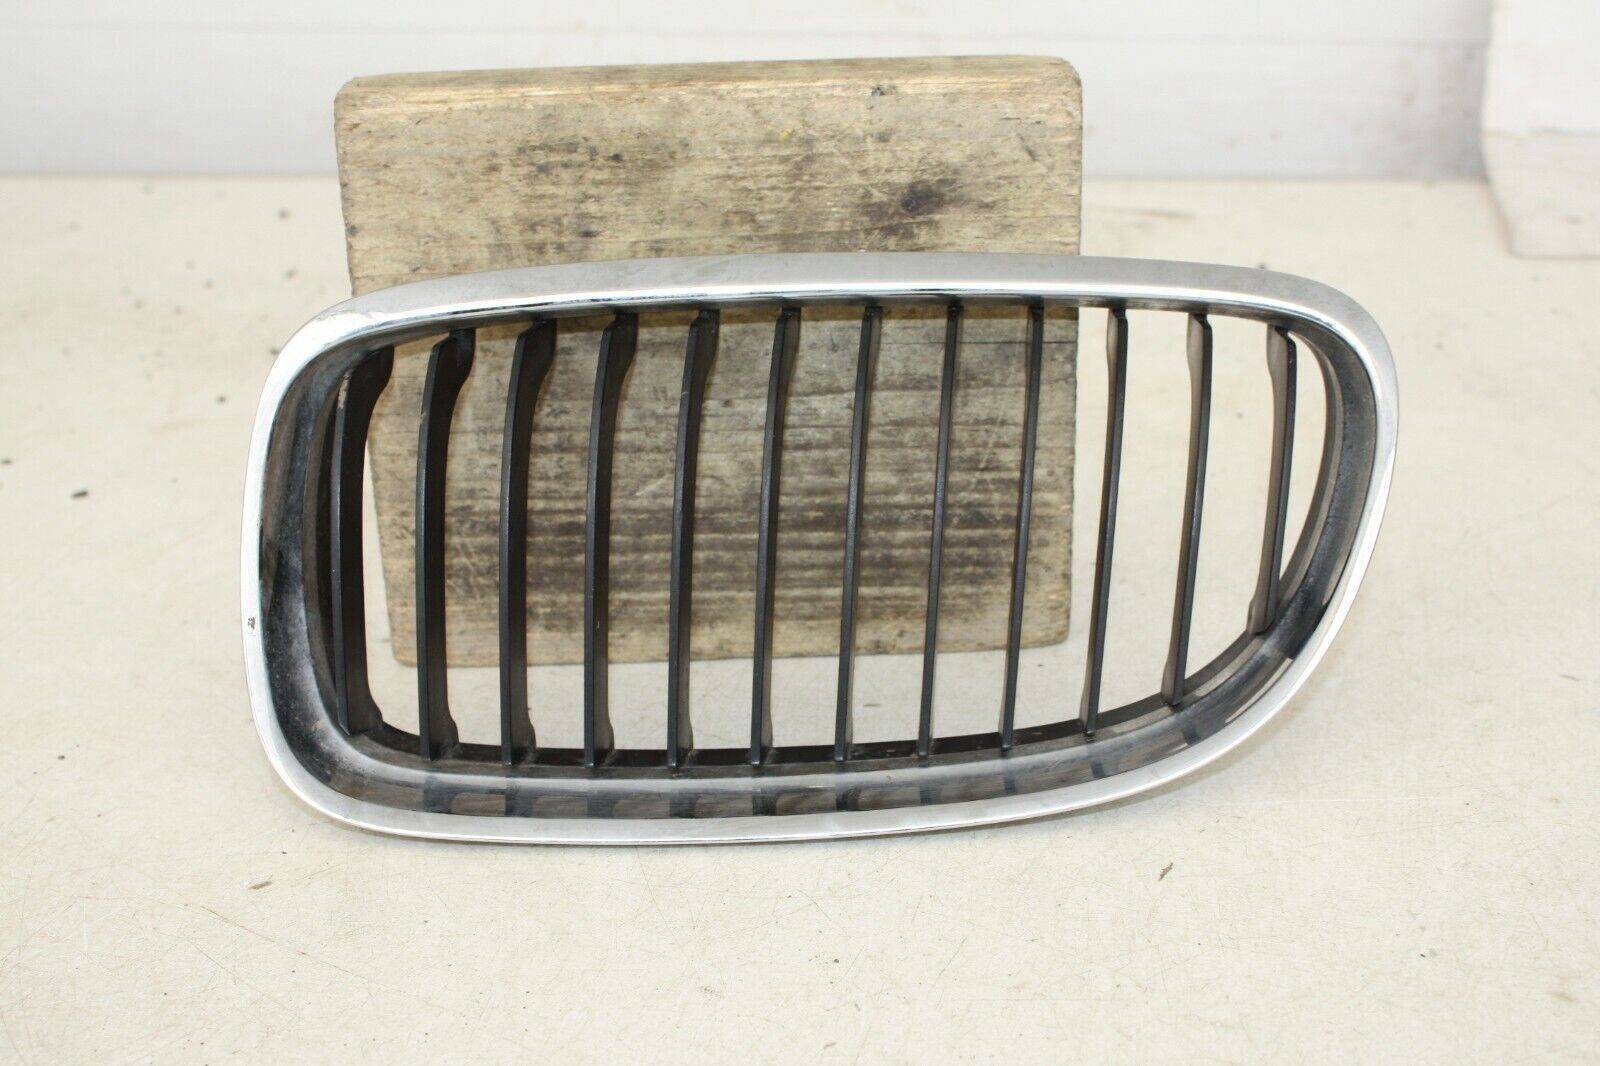 BMW-3-SERIES-FRONT-BUMPER-KIDNEY-GRILL-LEFT-2008-TO-2012-175367532000